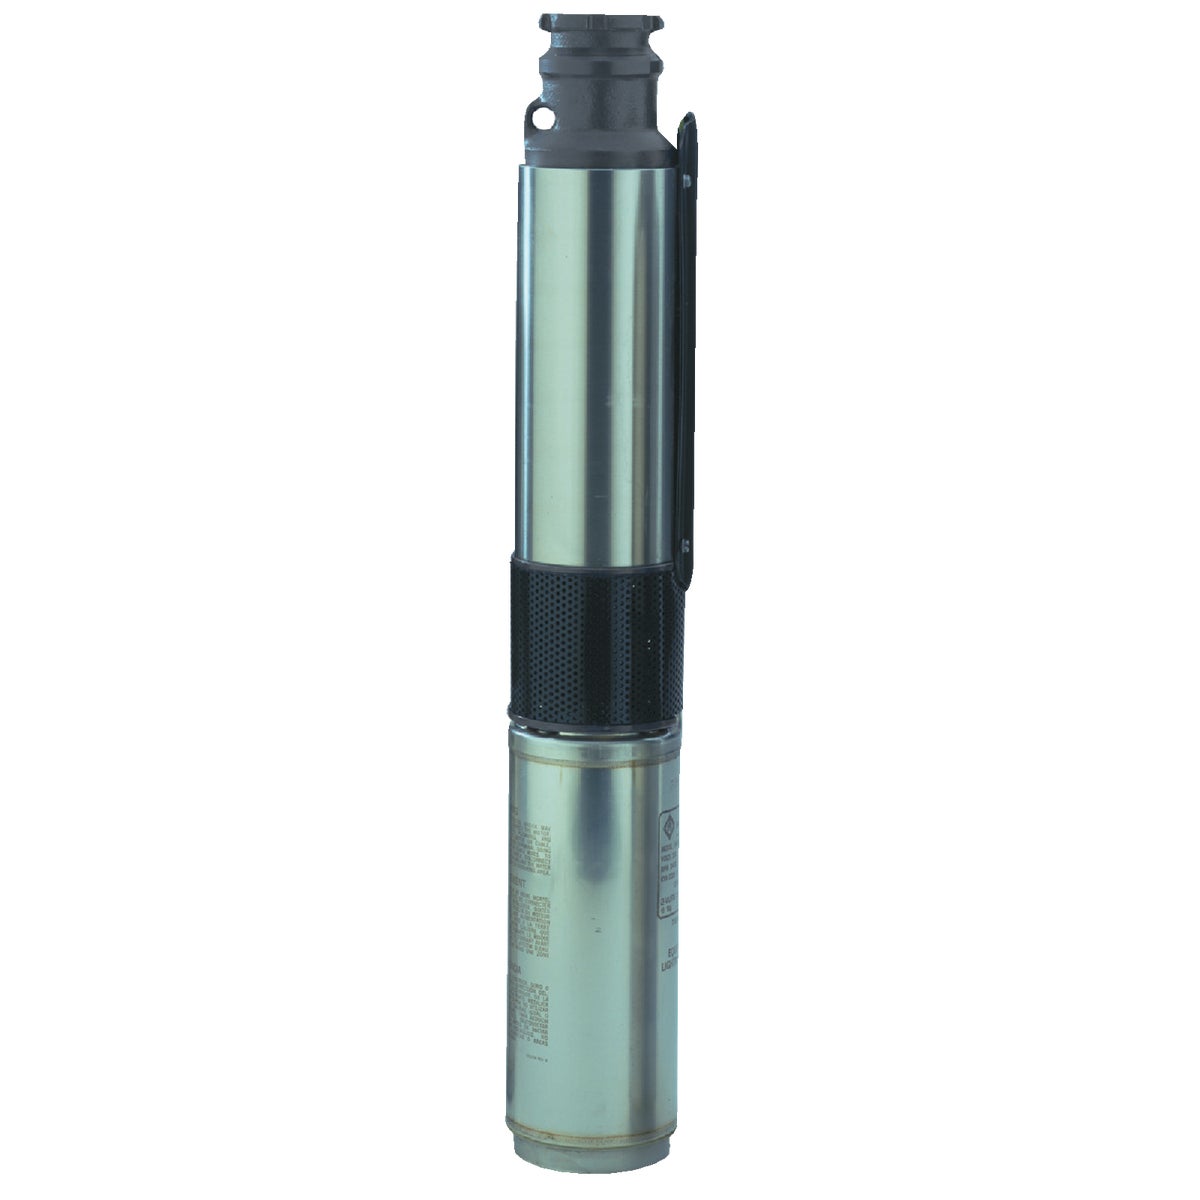 Star Water Systems 1 HP Submersible Well Pump, 3W 230V